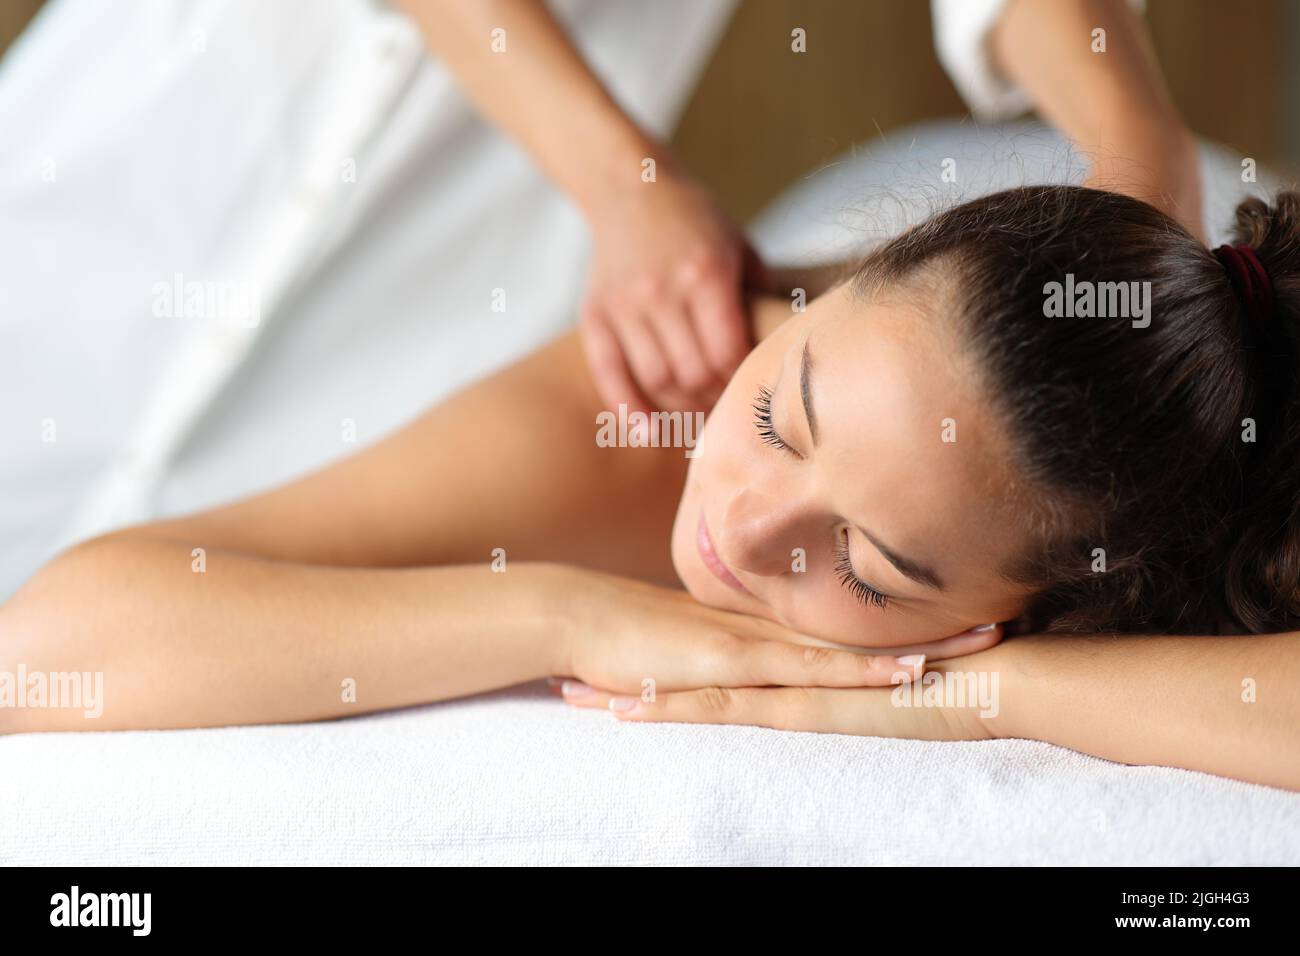 Woman relaxing with closed eyes and therapist massaging her in spa Stock Photo